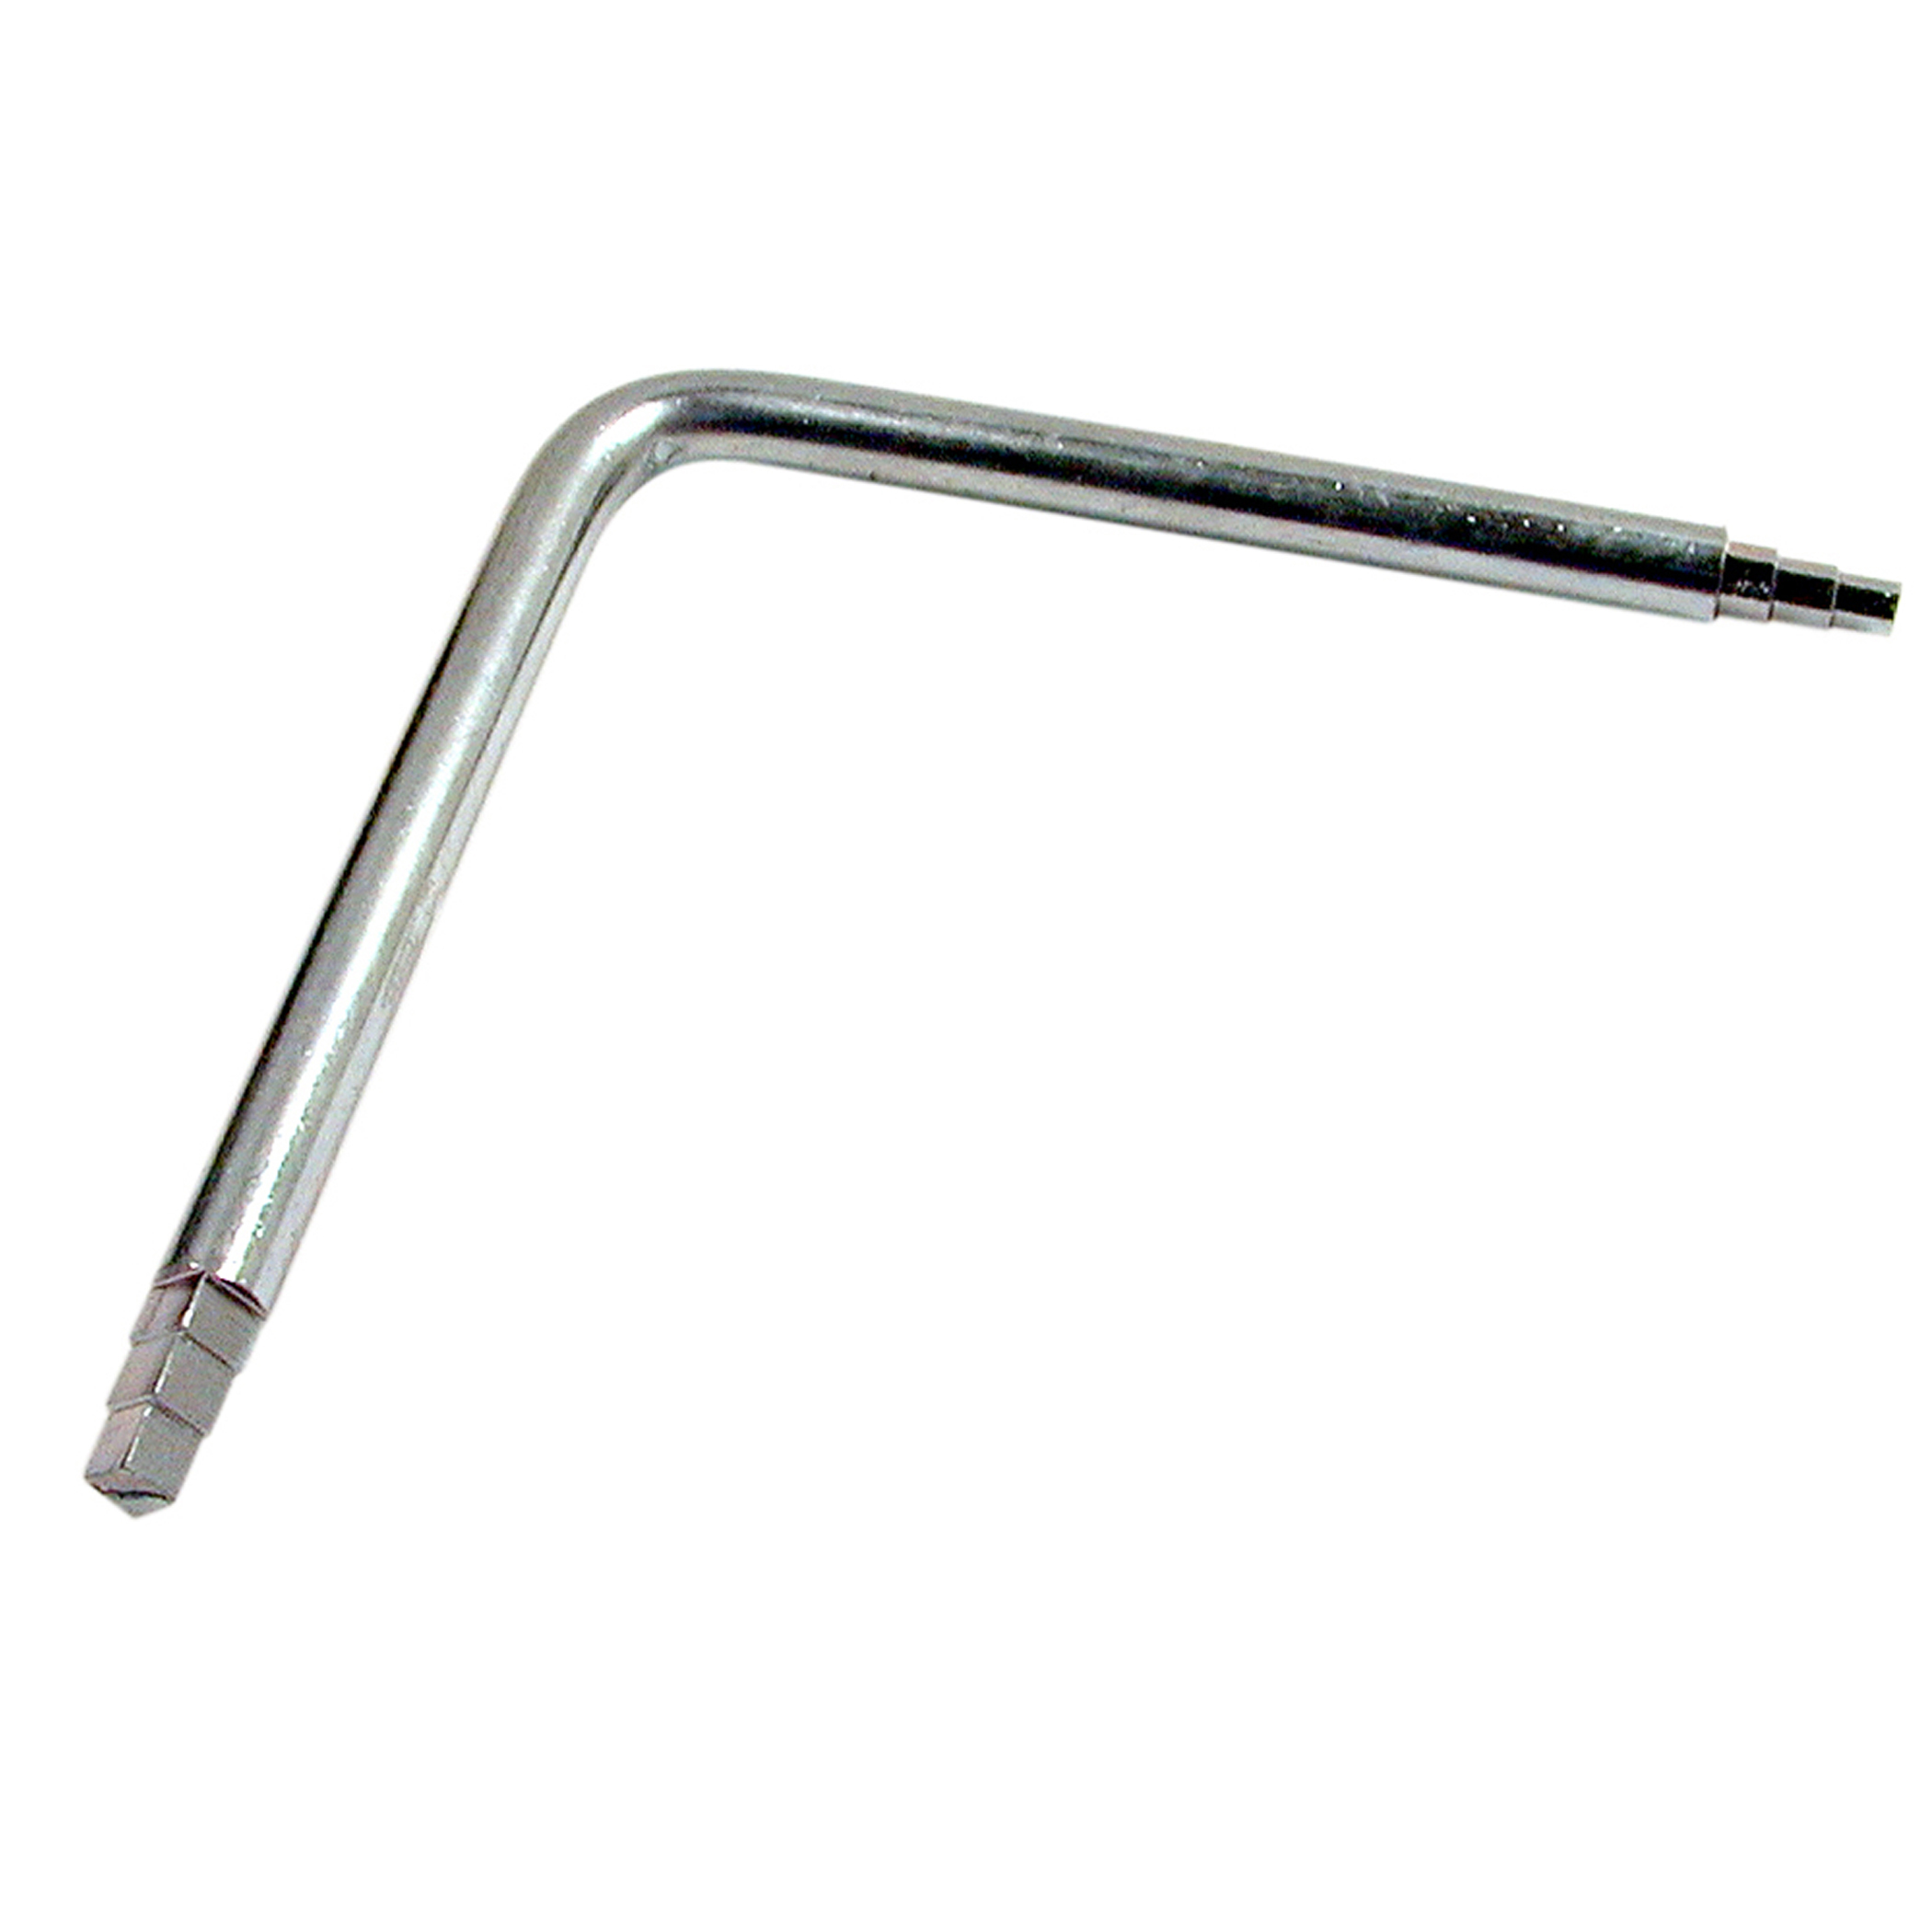 Lasco Seat Wrench 6 Step Style Item 13-2105 Step Angled Seated Wrench 